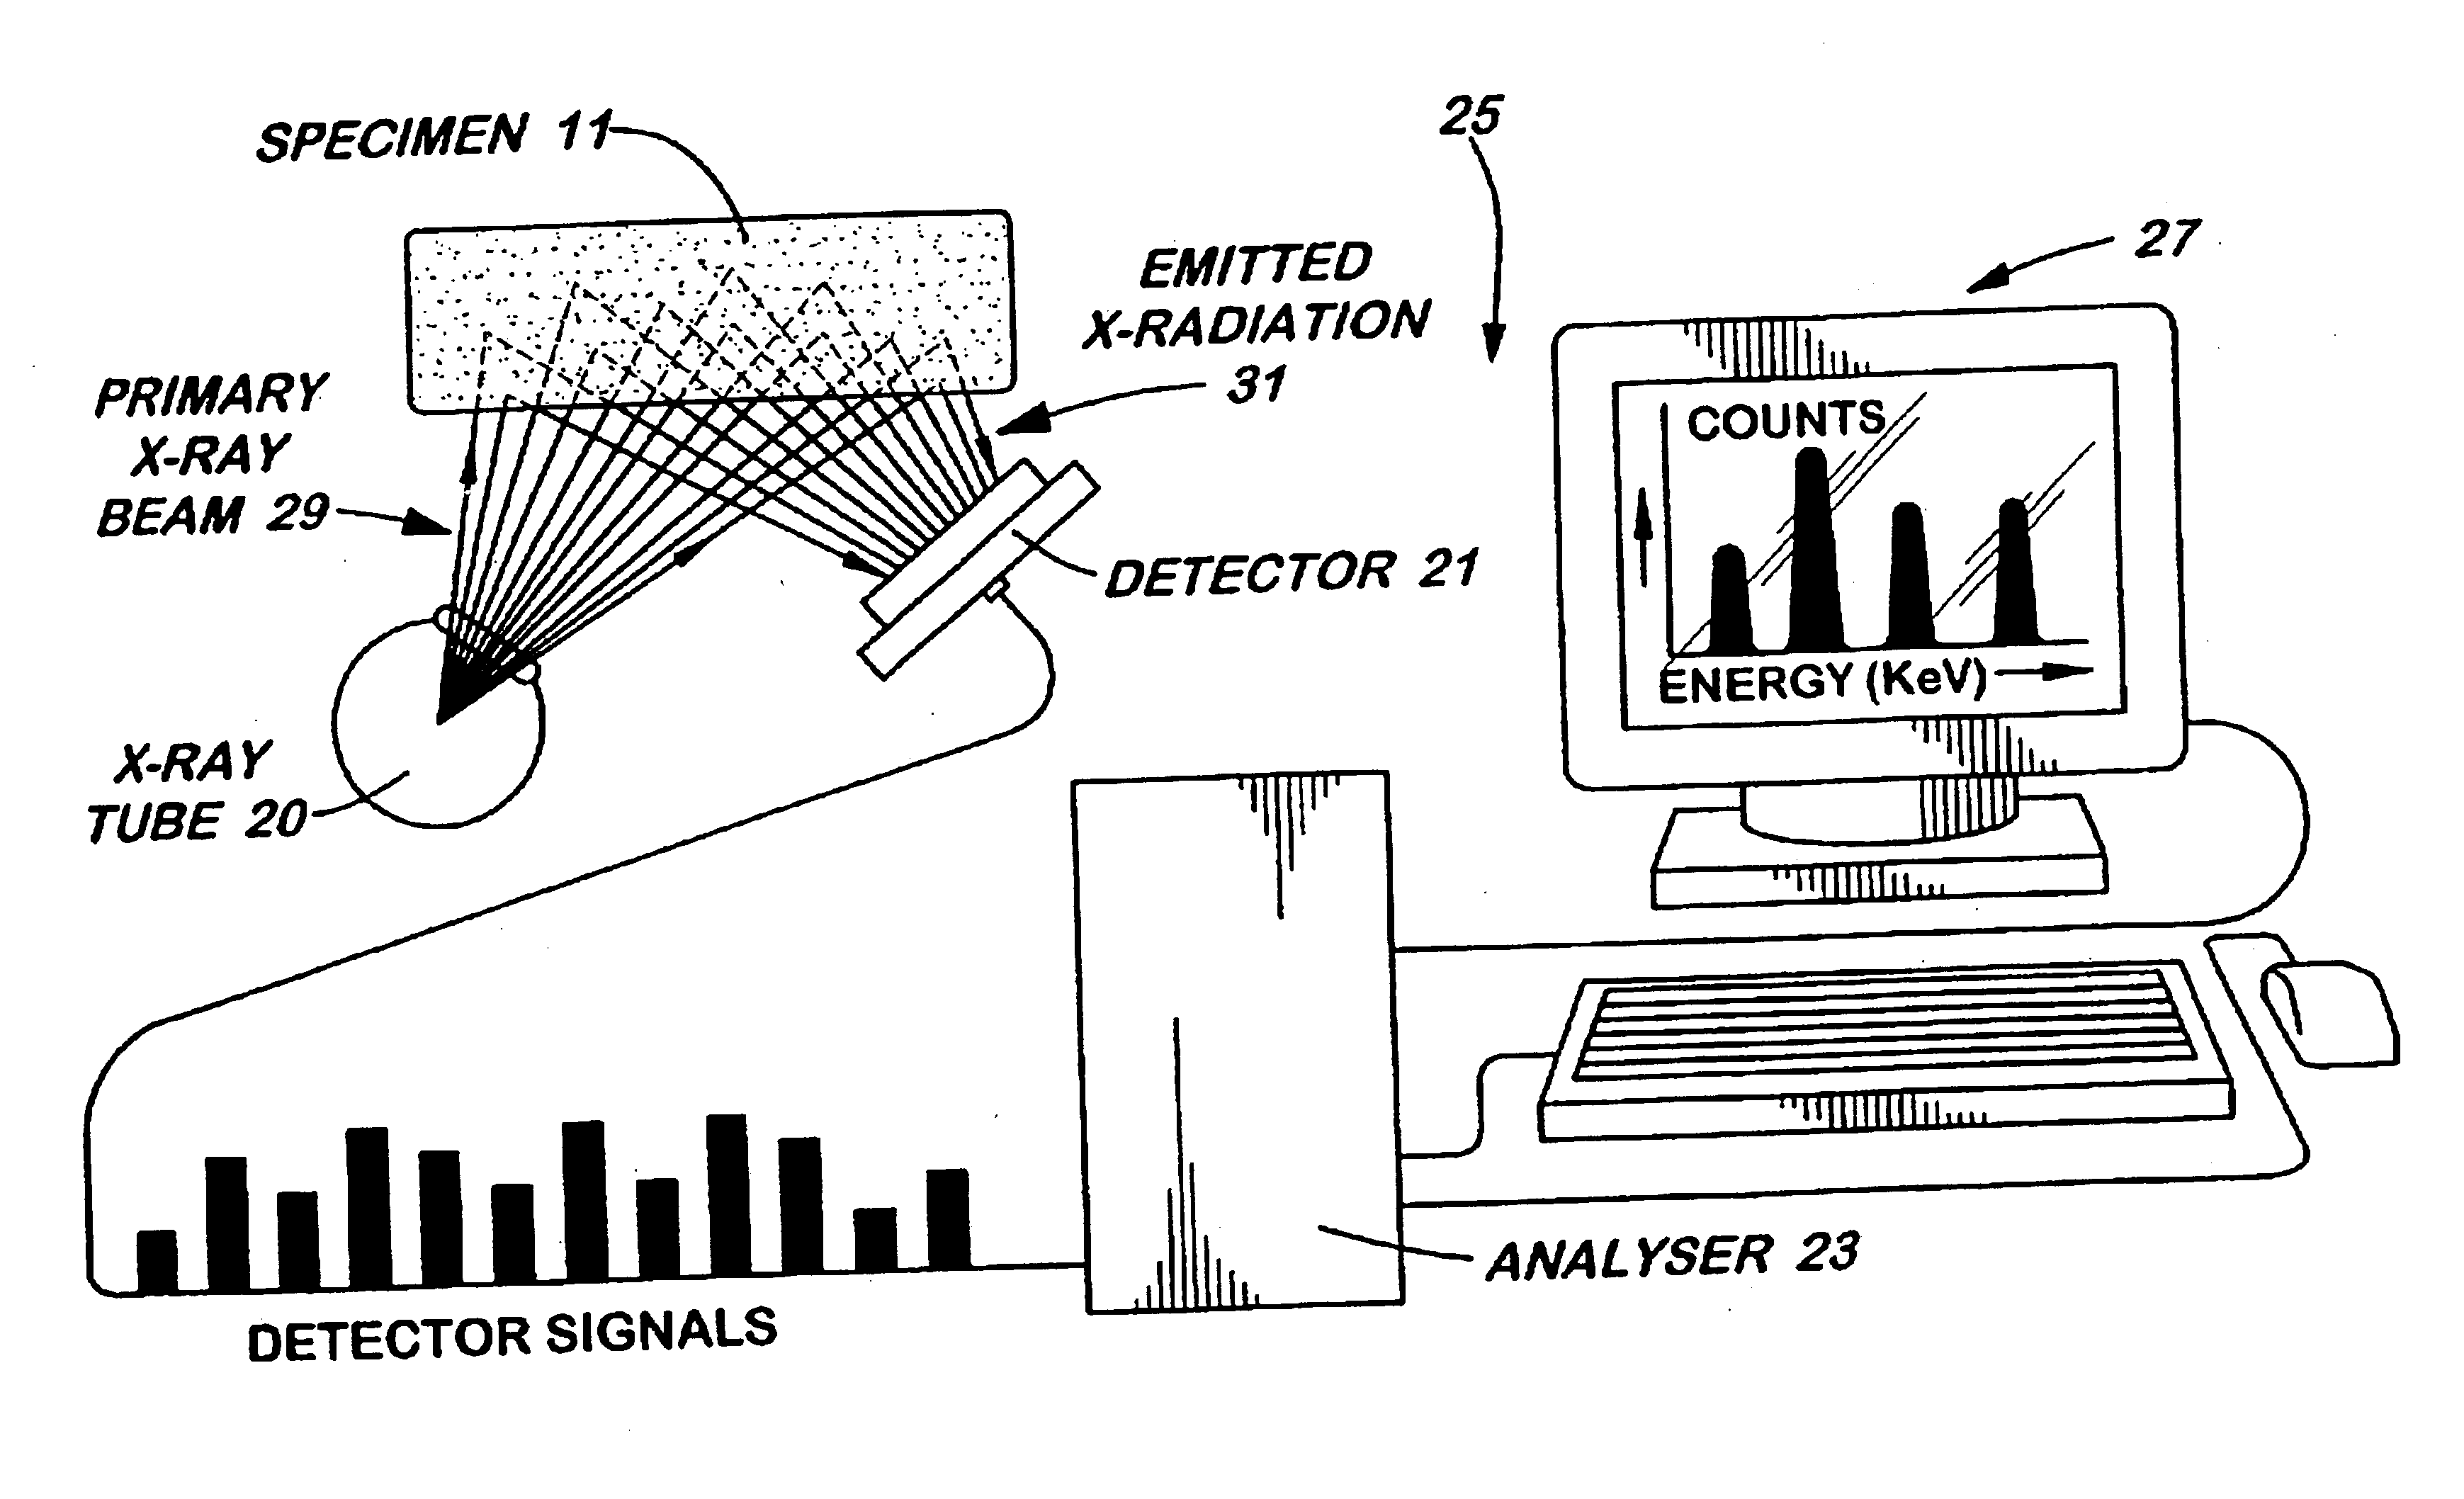 Methods for identification and verification using digital equivalent data system